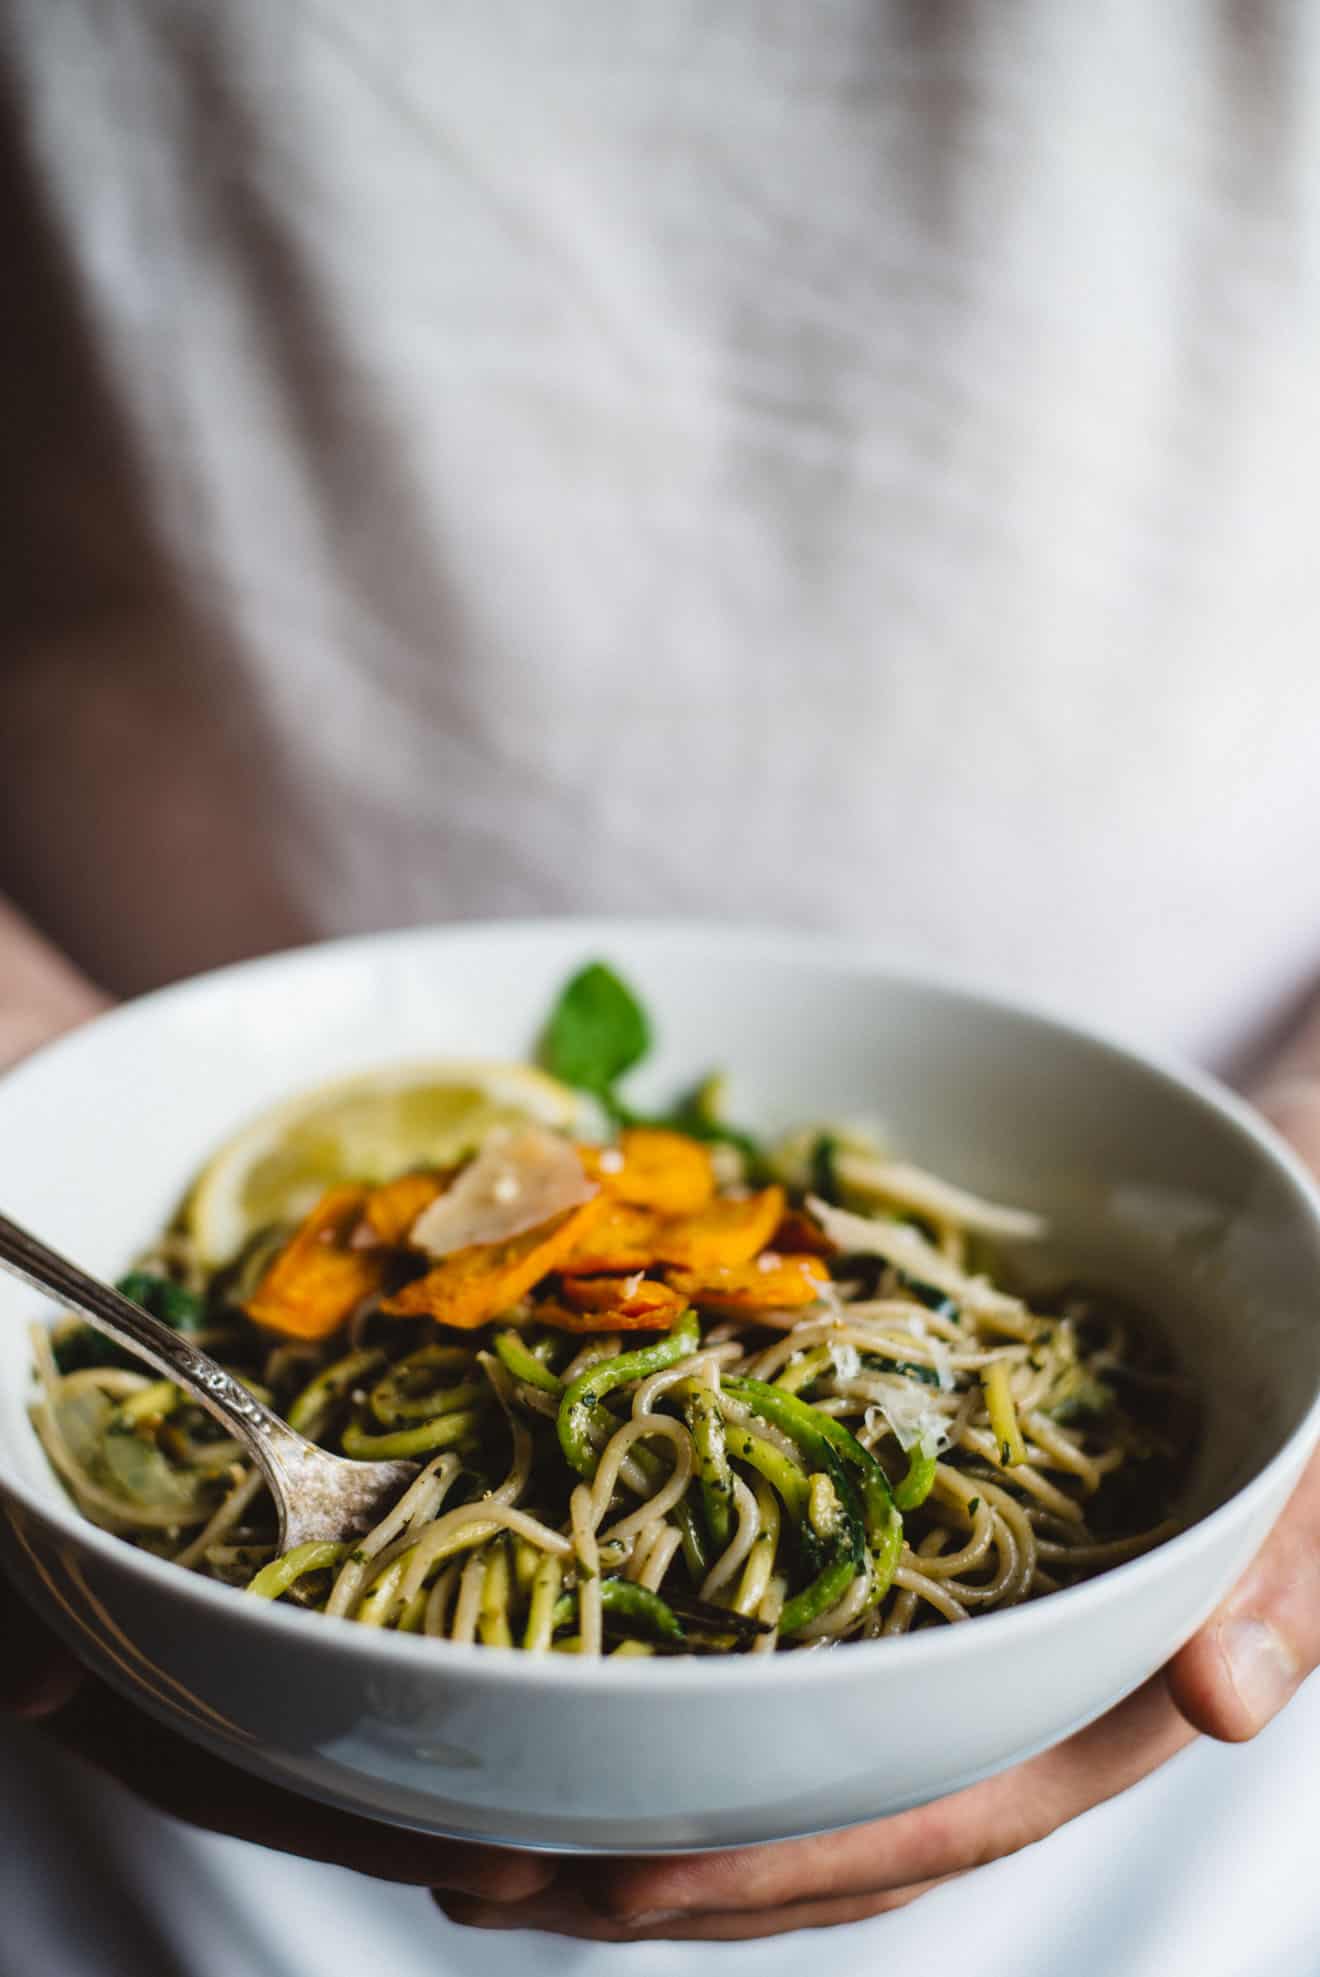 Carrot Top Pesto Pasta with Zucchini Noodles - easy gluten-free, vegetarian dinner in 30 minutes! by @healthynibs